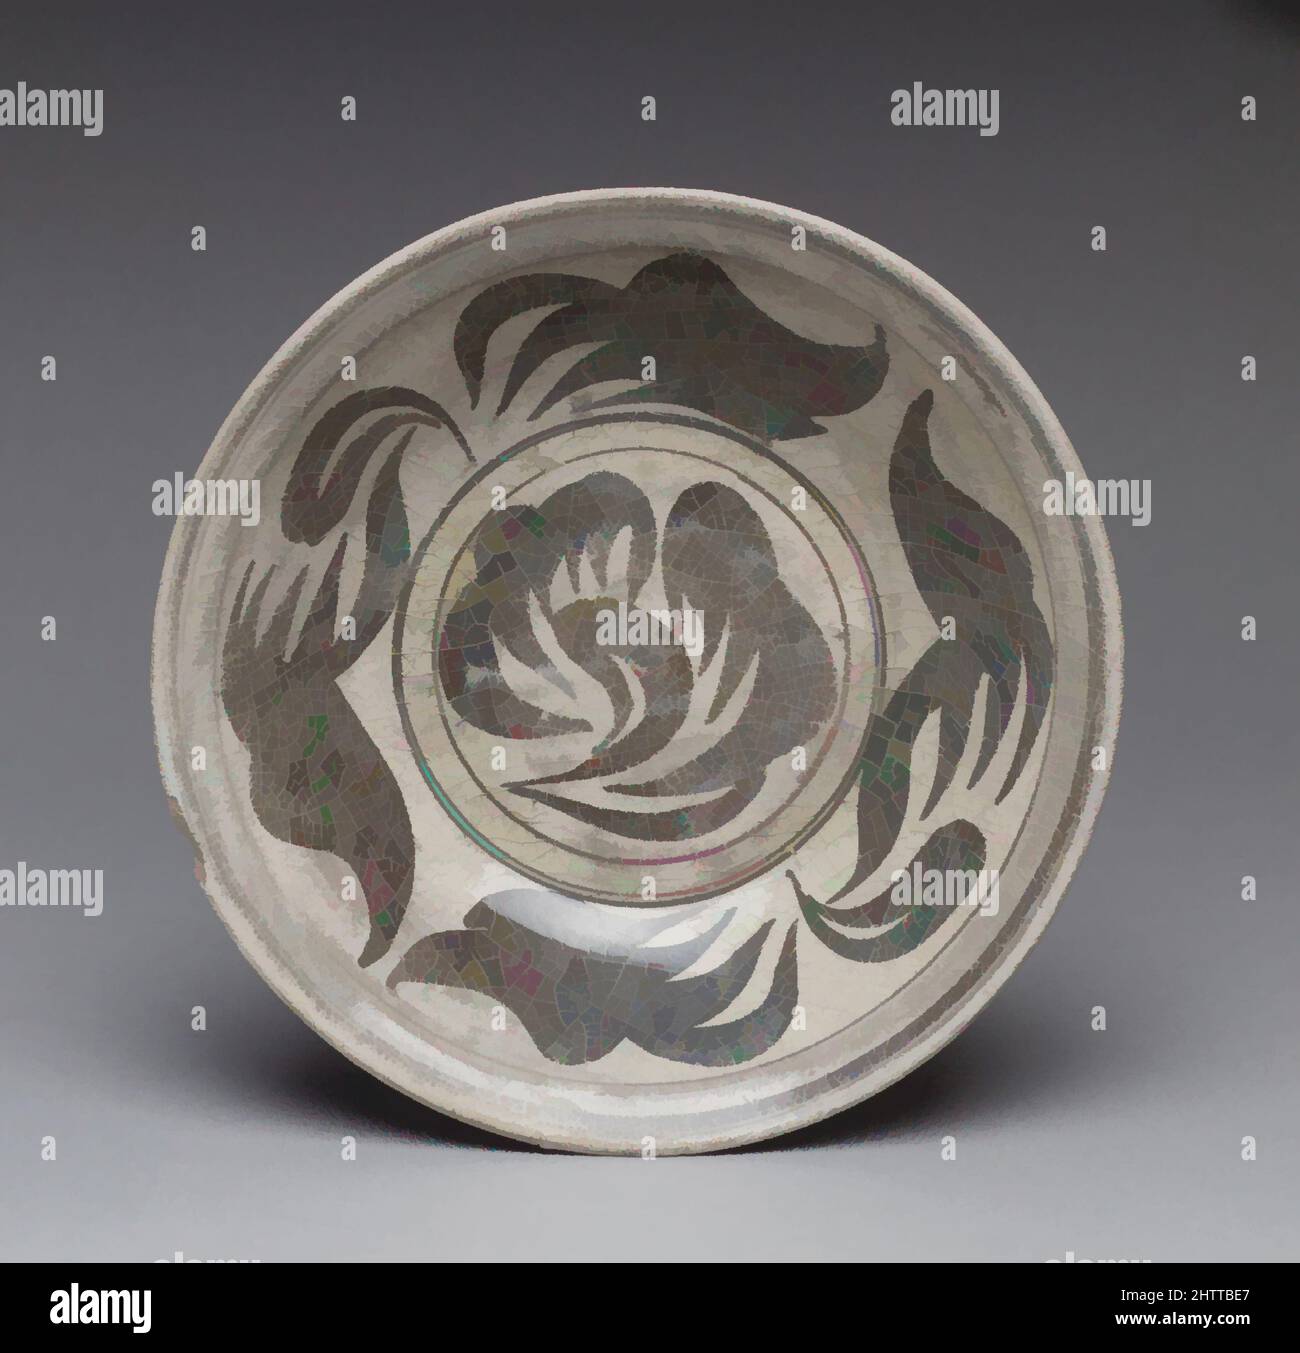 Art inspired by Dish, 14th–mid-16th century, Thailand, Earthenware with underglaze iron-brown decoration (Kalong ware), H. 2 in. (5.1 cm); Diam. 8 1/4 in. (21 cm), Ceramics, Ceramics were produced in some number in the kingdom of Lan Na centered in northern Thailand. More than 200, Classic works modernized by Artotop with a splash of modernity. Shapes, color and value, eye-catching visual impact on art. Emotions through freedom of artworks in a contemporary way. A timeless message pursuing a wildly creative new direction. Artists turning to the digital medium and creating the Artotop NFT Stock Photo